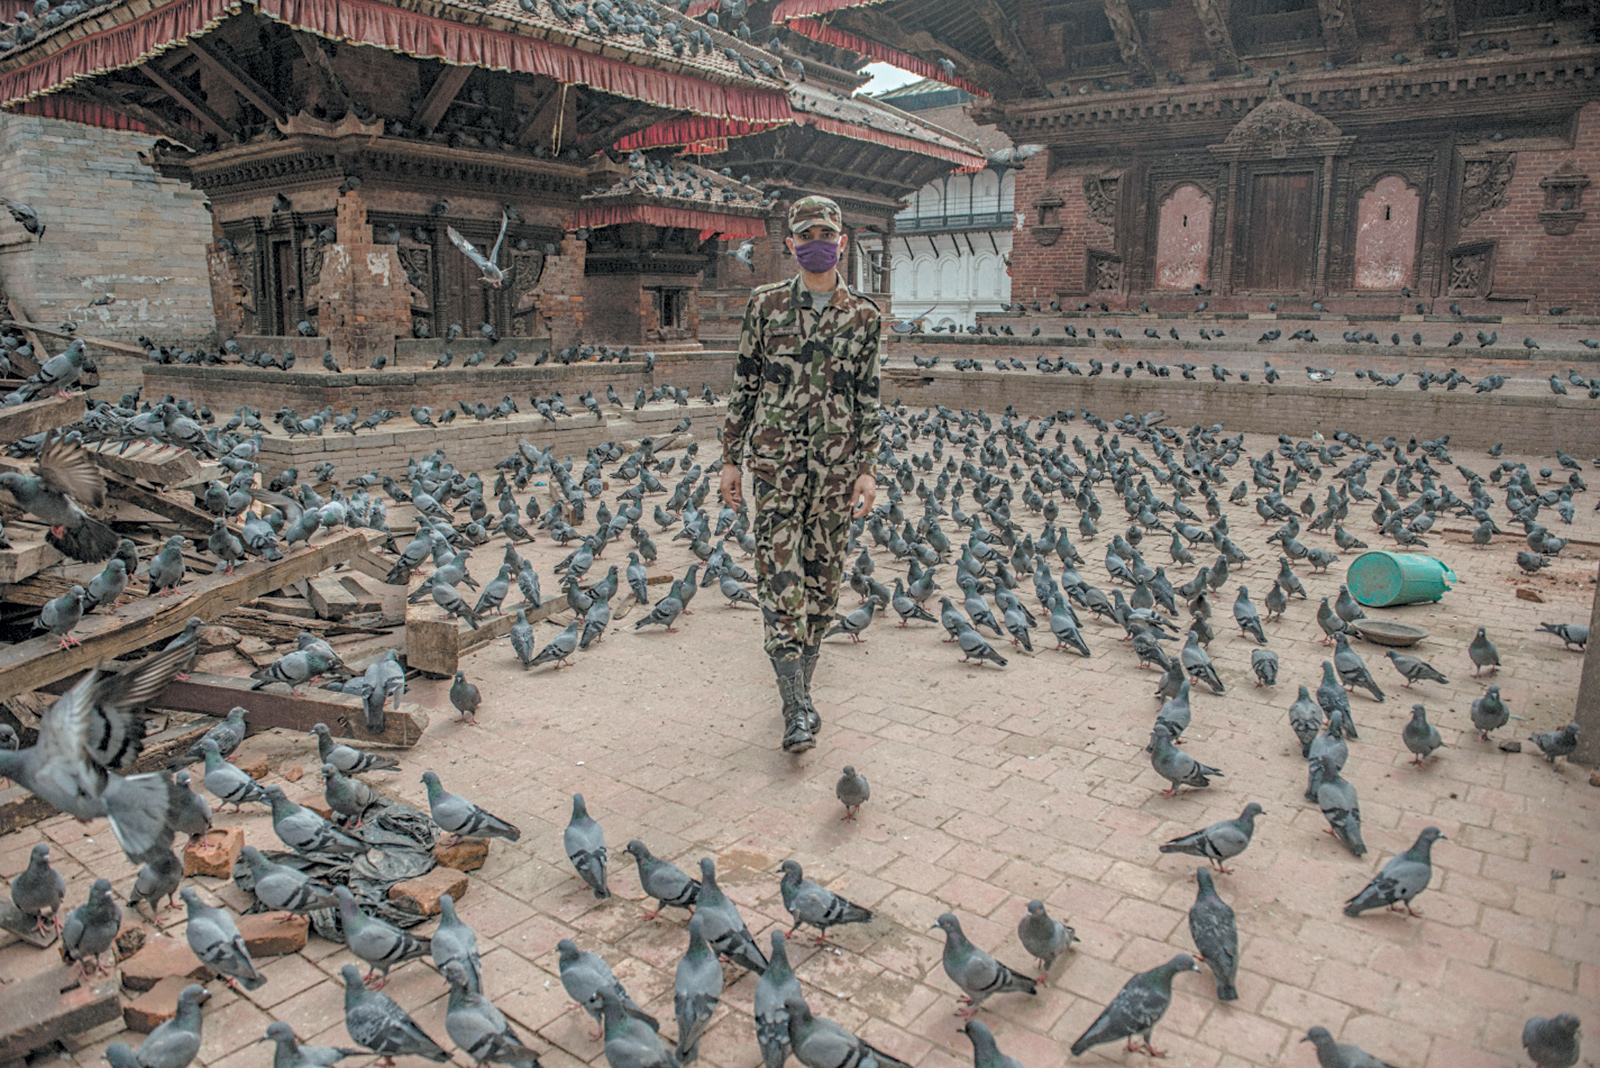 A Nepali soldier at the Kal Bhairav Temple, Durbar Square, Kathmandu, after the earthquake